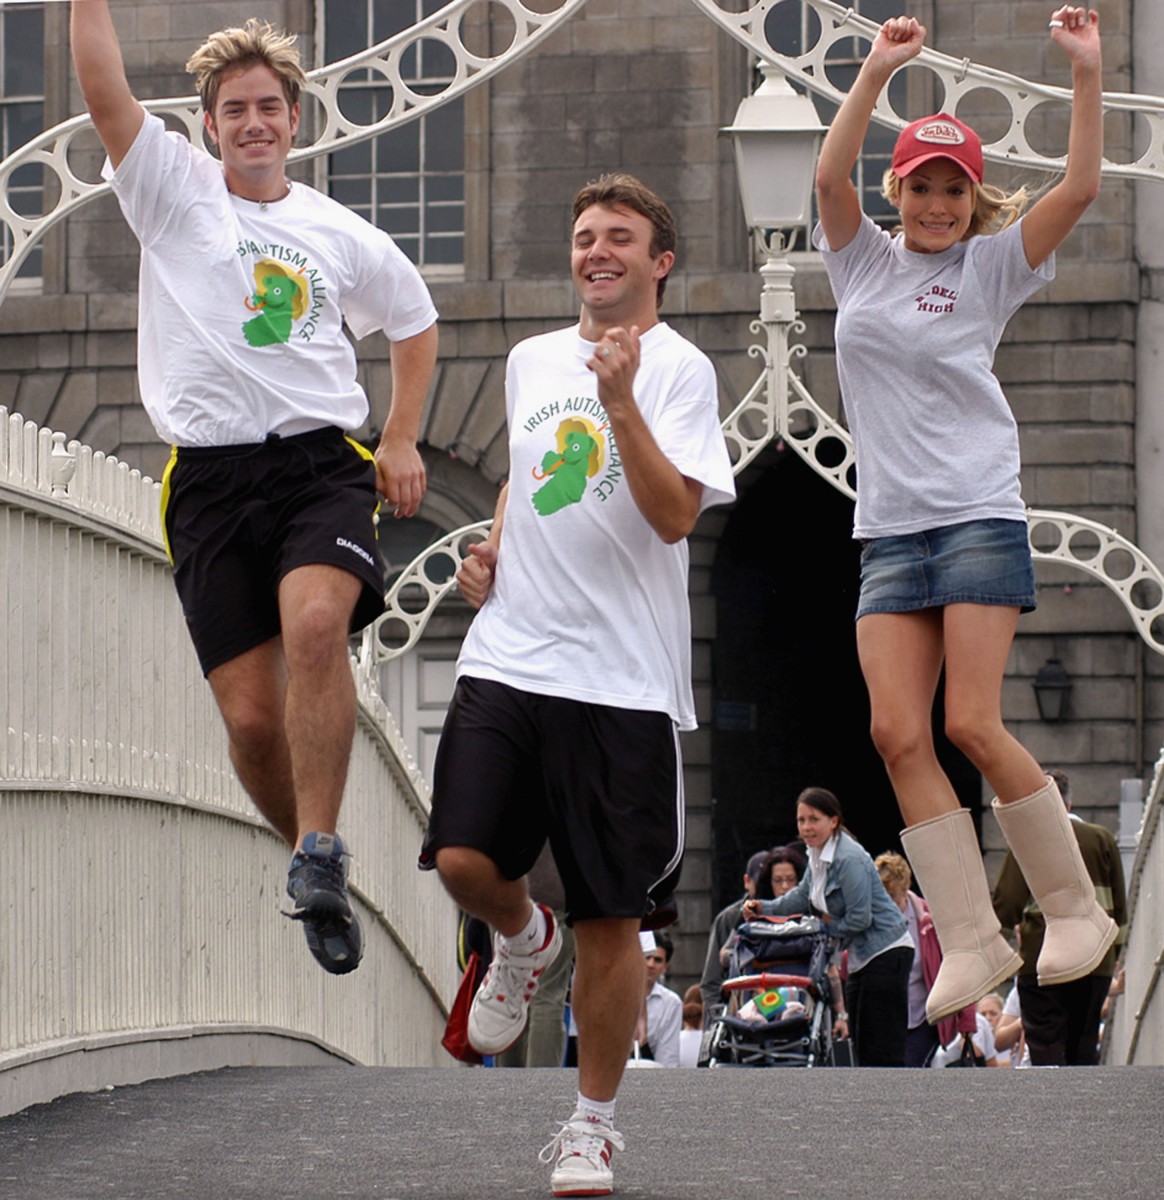 FOR A GOOD CAUSE: (L-R) Simon Casey, Jonathan Wilkes, Hayley Evetts and the rest of the cast from 'Grease' take part in a charity Fun Run from the Ha'Penny Bridge to The Point Theatre on August 10th, 2004 in Dublin, Ireland. Such runs are often organised by volunteer organisations